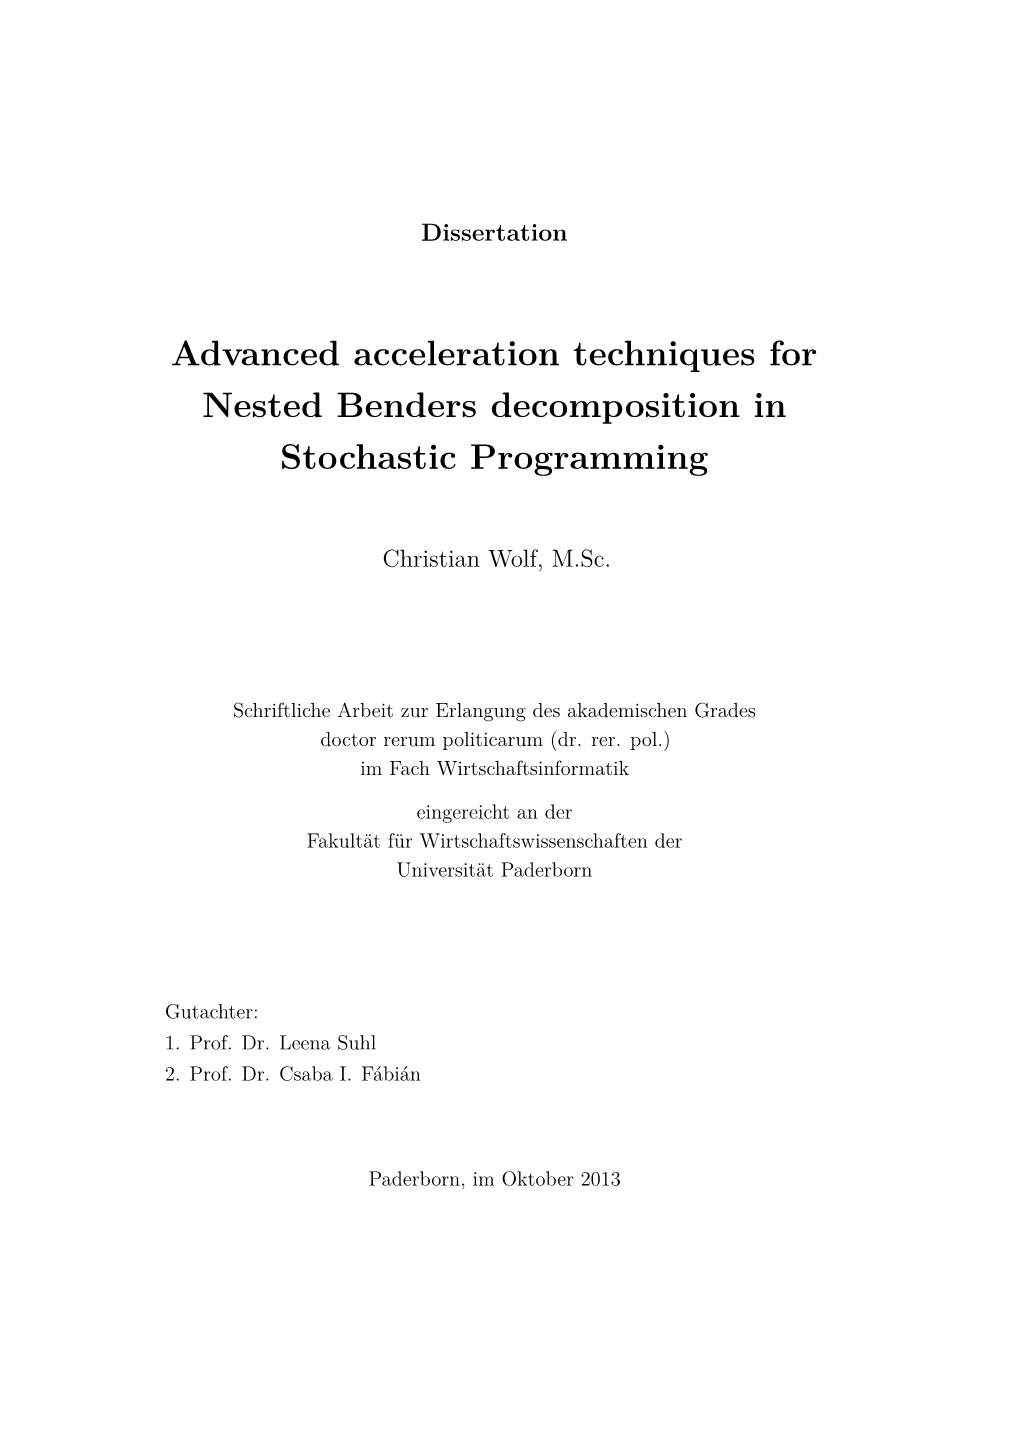 Advanced Acceleration Techniques for Nested Benders Decomposition in Stochastic Programming